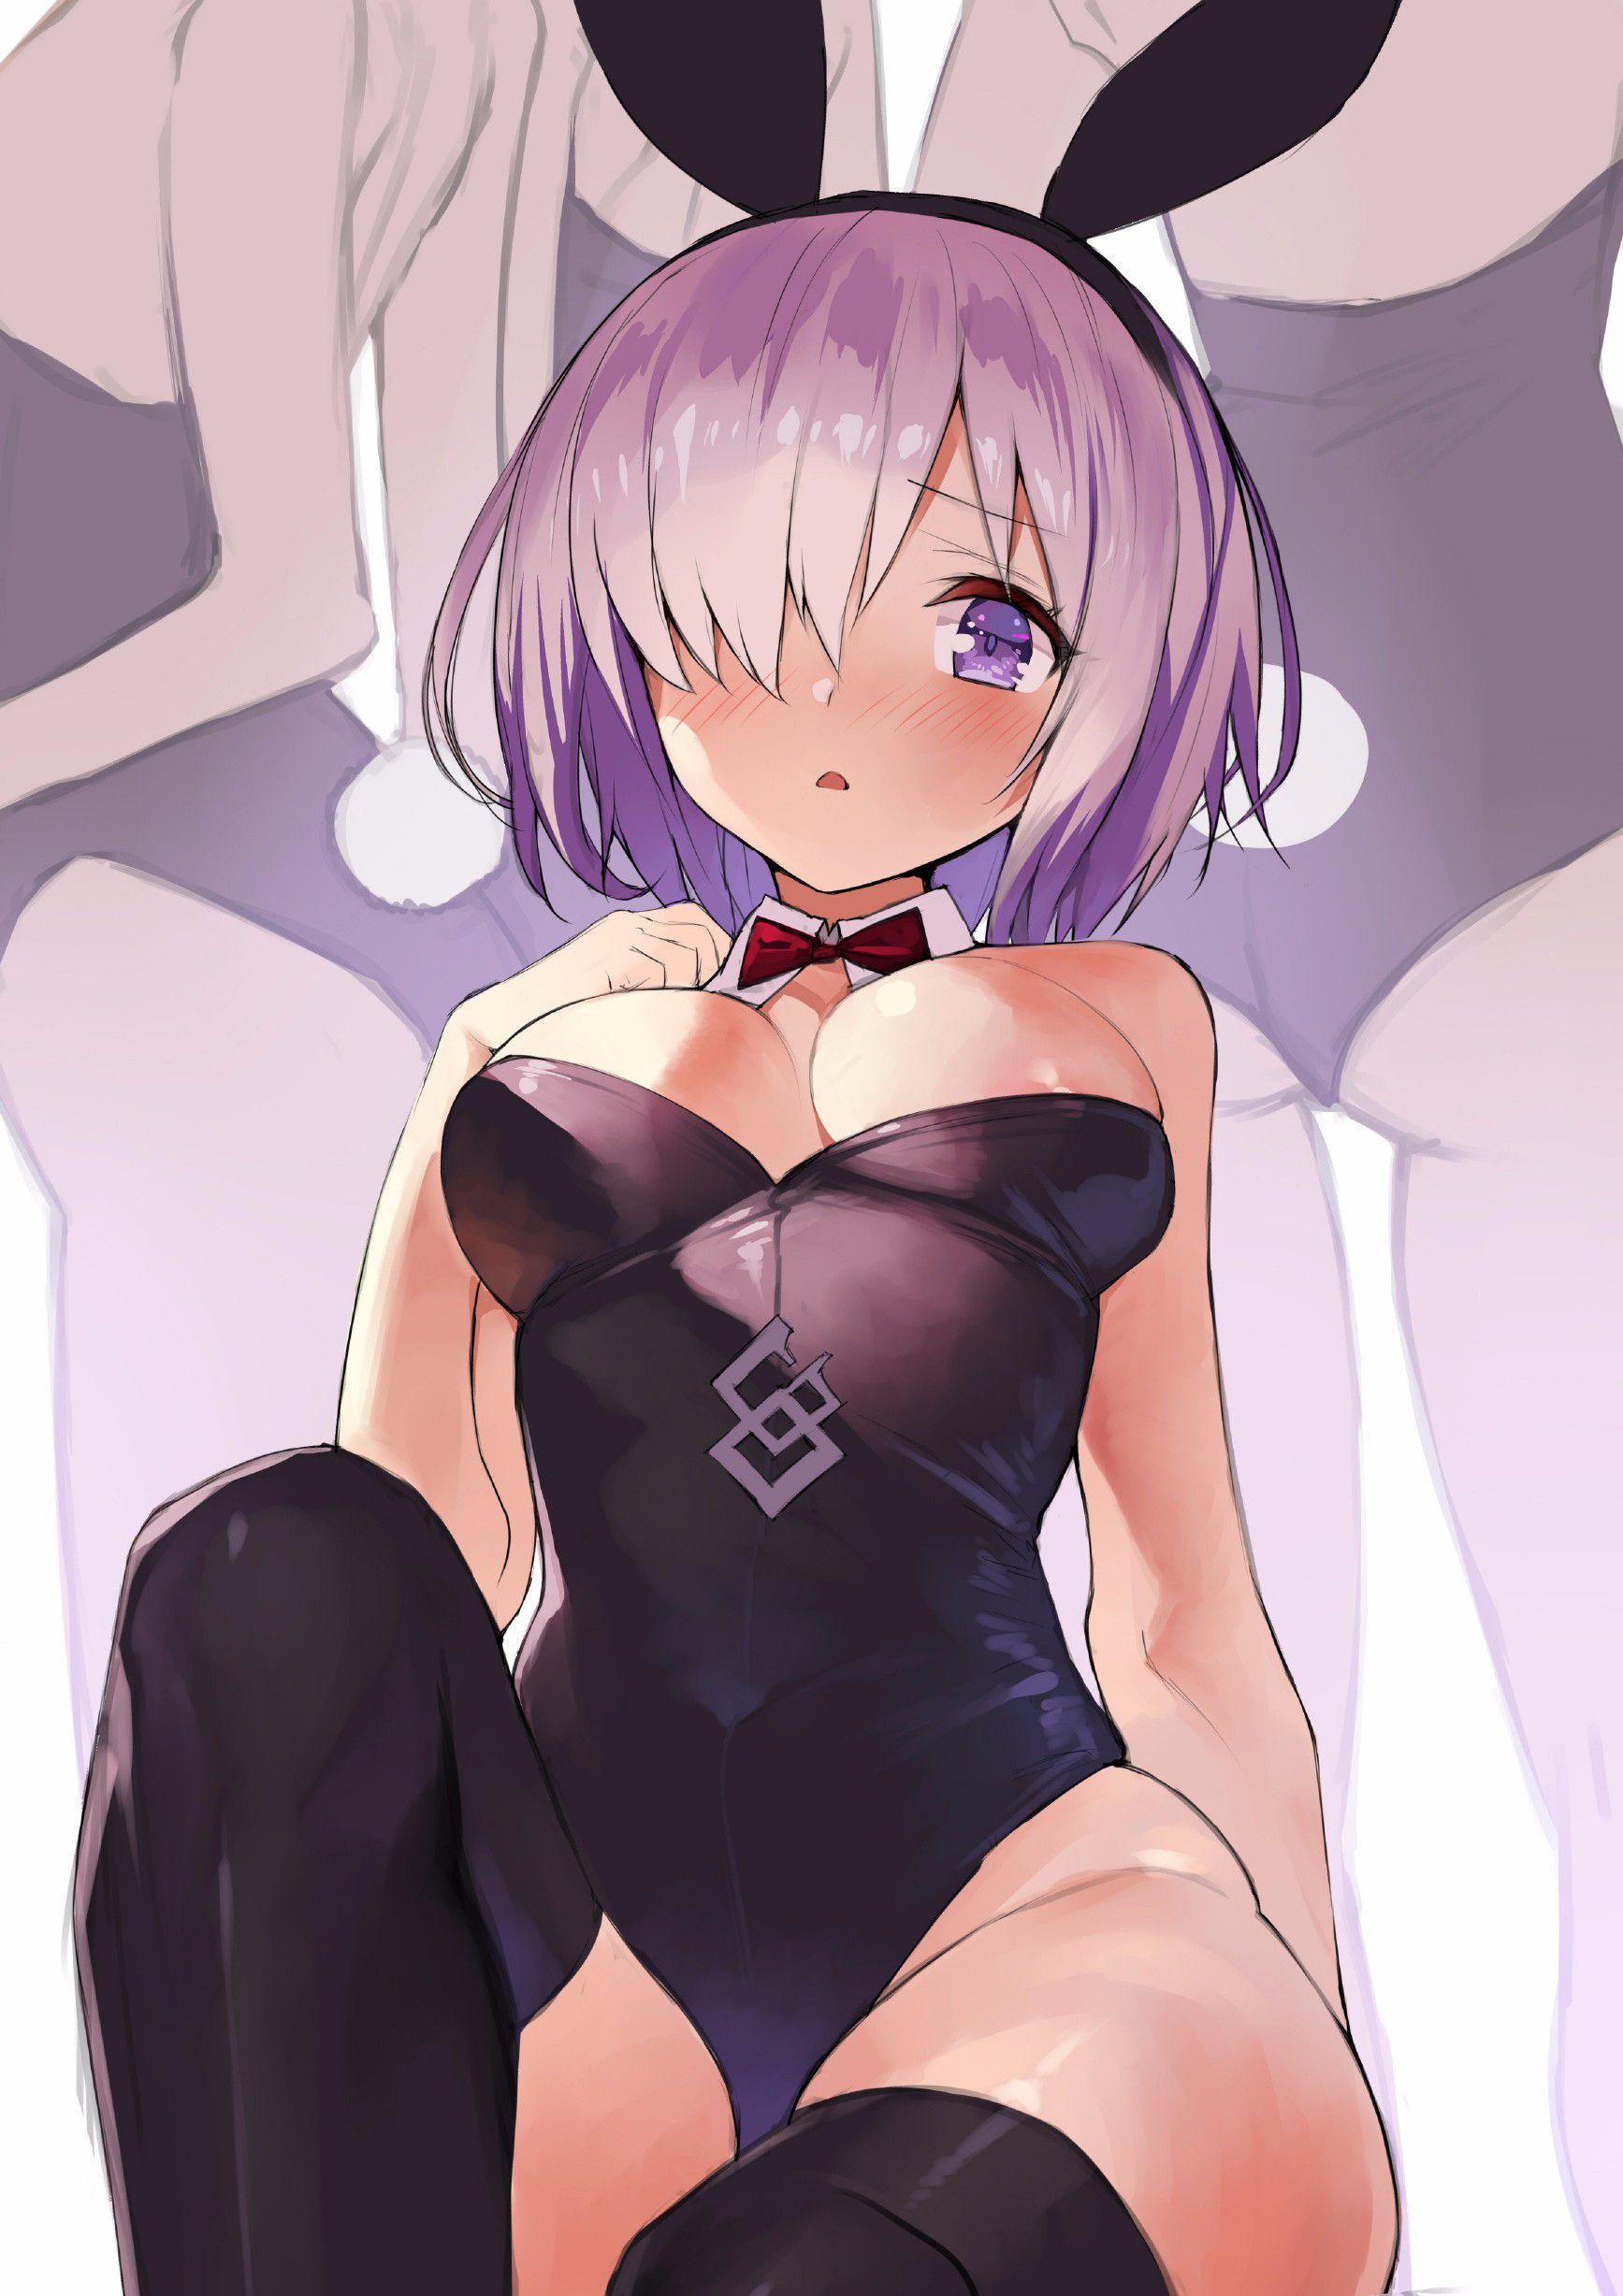 【Secondary erotic】 The secondary dosquebe image of a girl dressed in a bunny girl costume that stands out for the dosukebe of the buttocks and pie is here 12